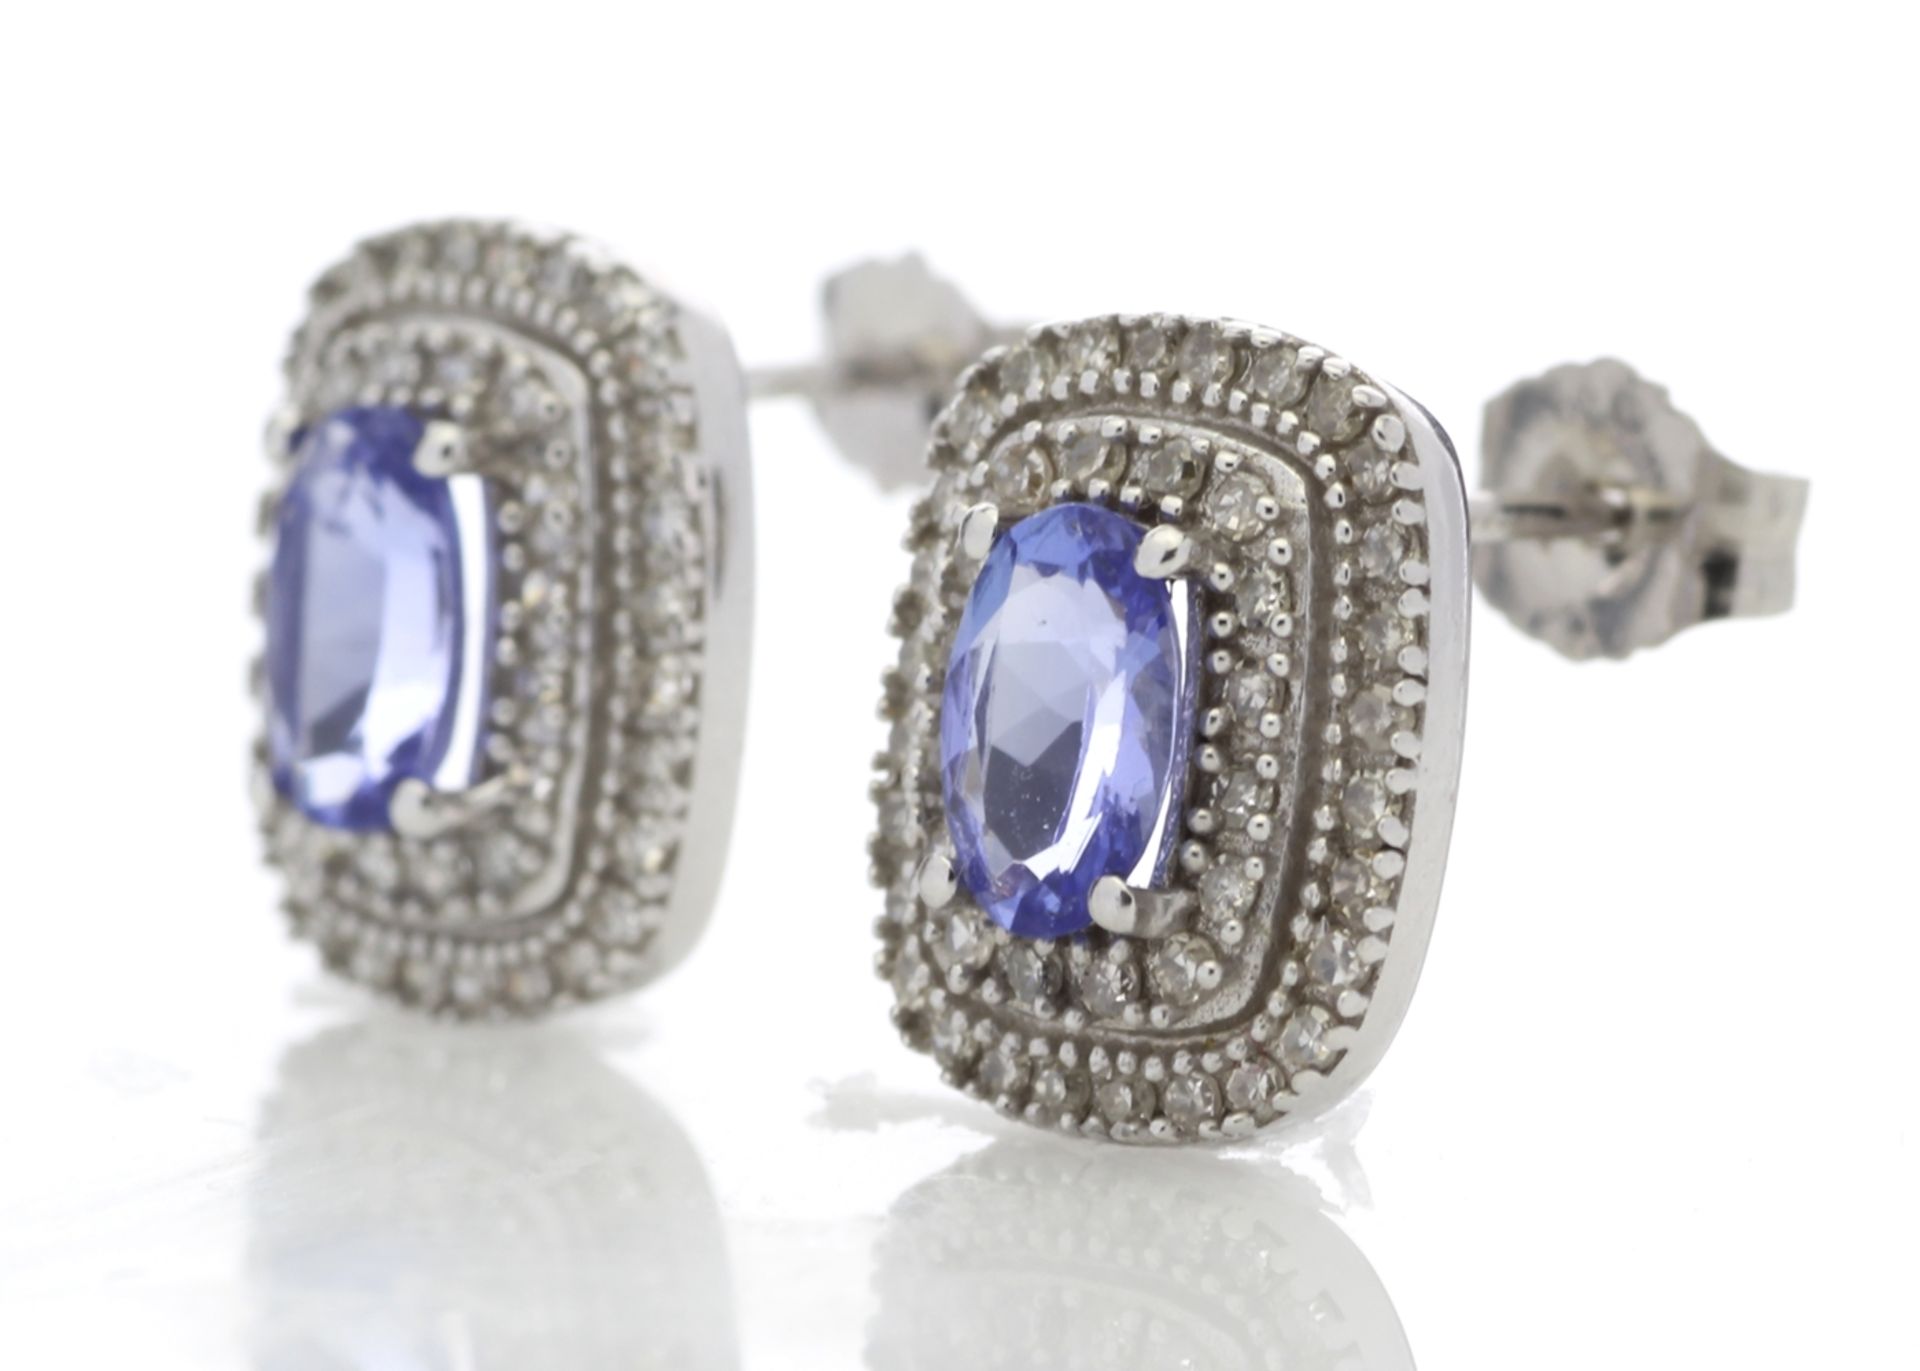 9ct White Gold Oval Diamond And Tanzanite Earring 0.35 Carats - Valued by GIE £3,320.00 - Unique and - Image 2 of 5